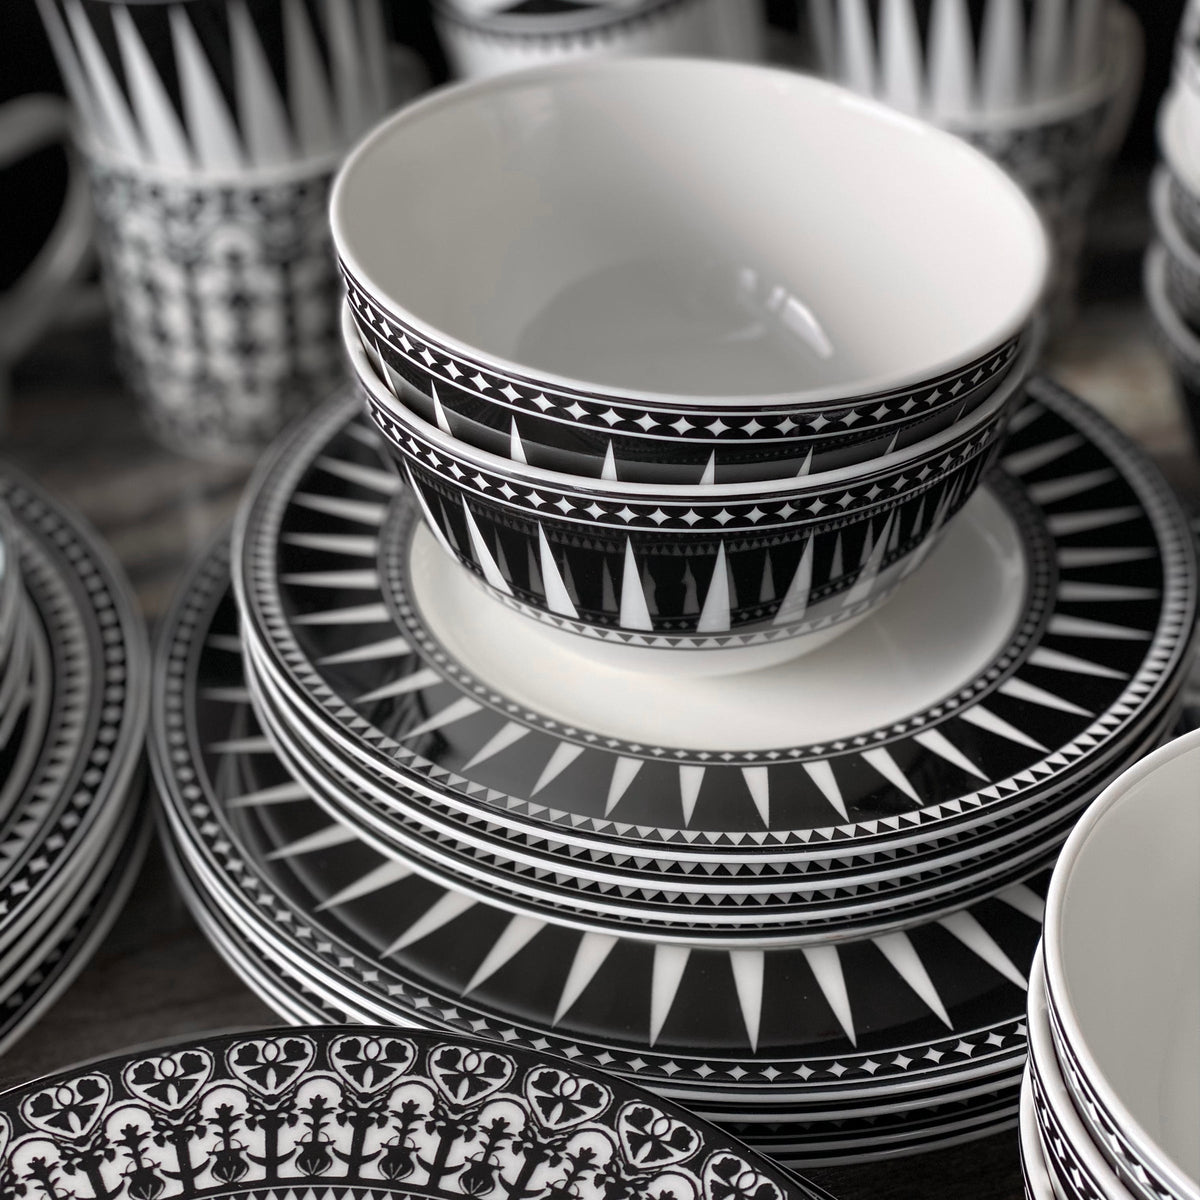 A stack of Art Deco inspired ceramics, featuring black and white patterned dishes including the Marrakech Cereal Bowl from Caskata Artisanal Home and plates with intricate geometric designs, displayed together.